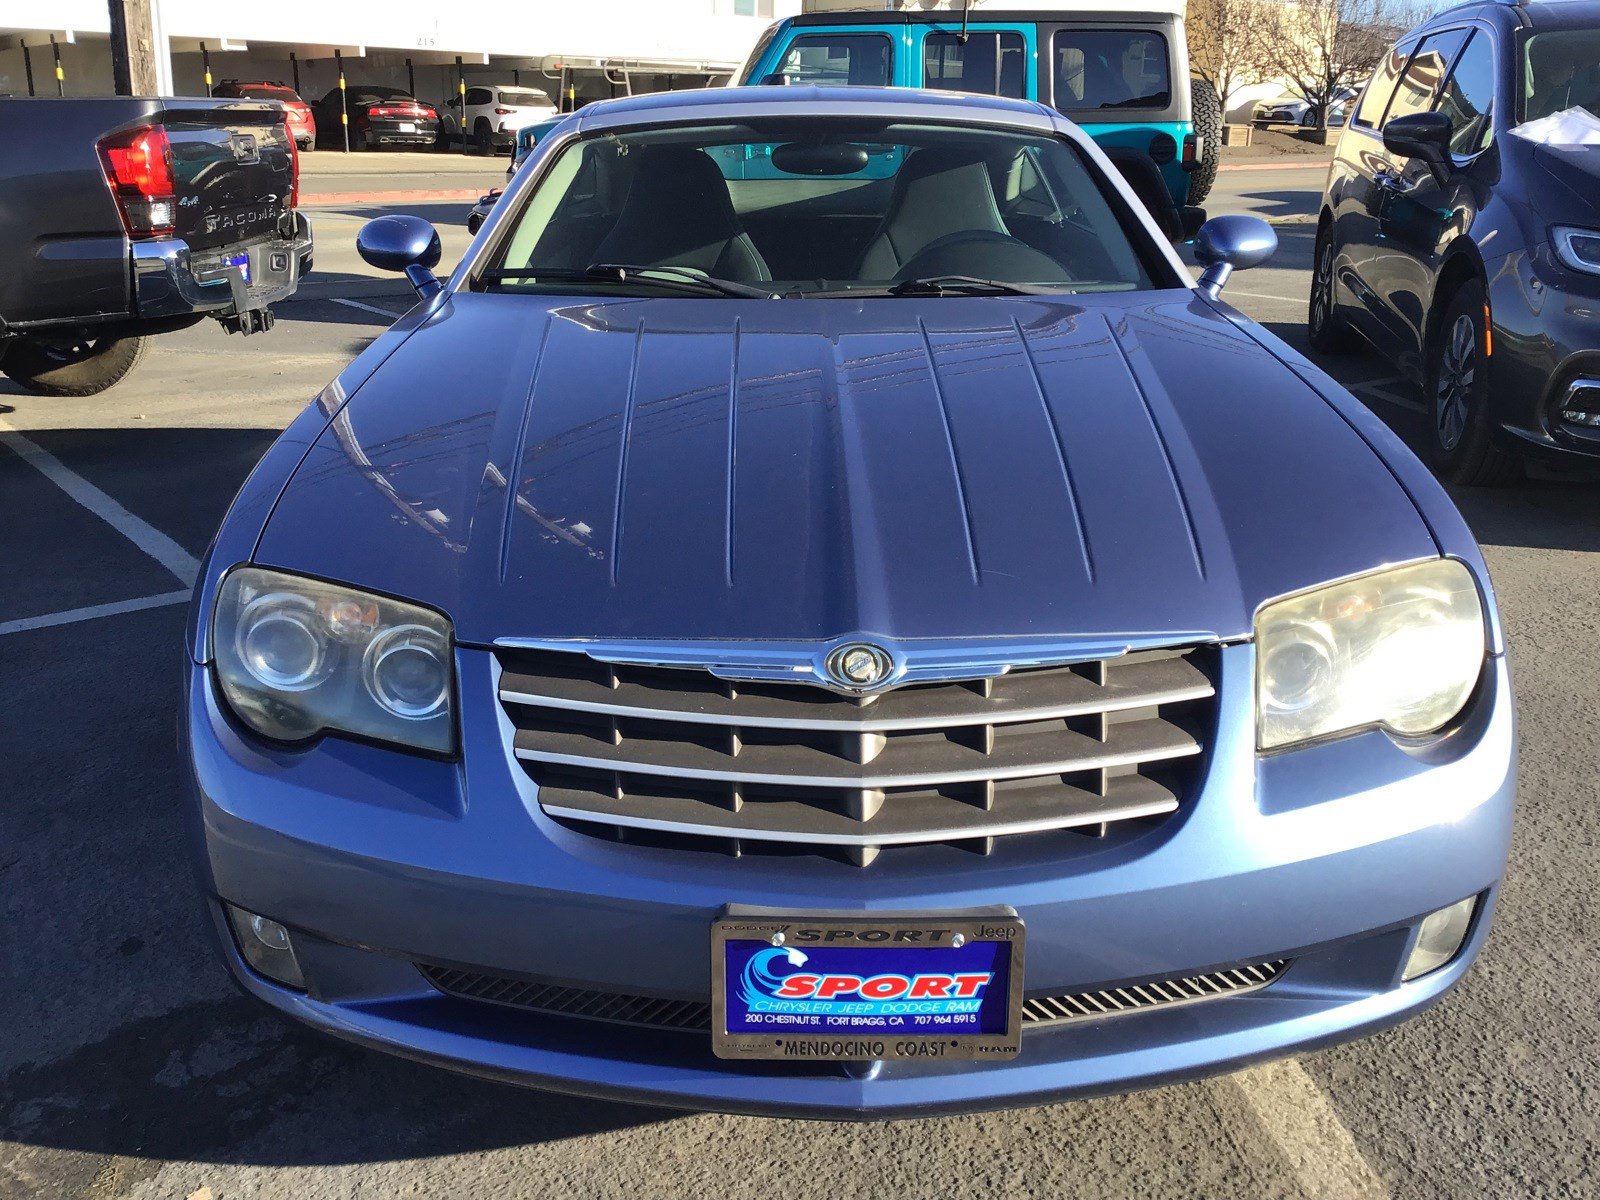 Used 2008 Chrysler Crossfire Limited with VIN 1C3LN69L58X074813 for sale in Fort Bragg, CA